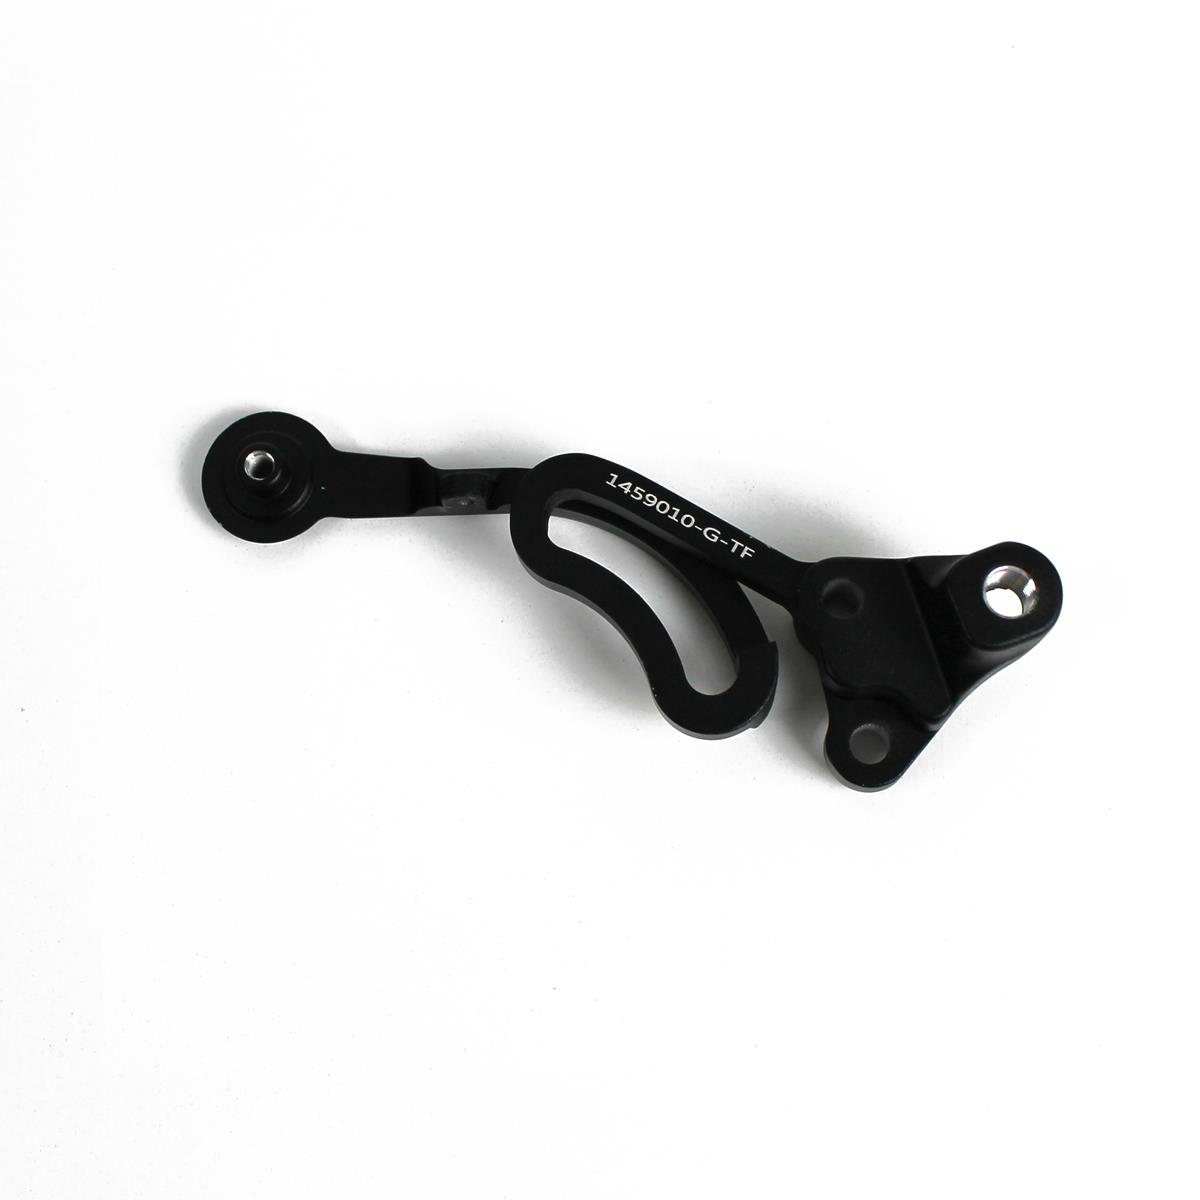 Spare torque arm for Powerplay models